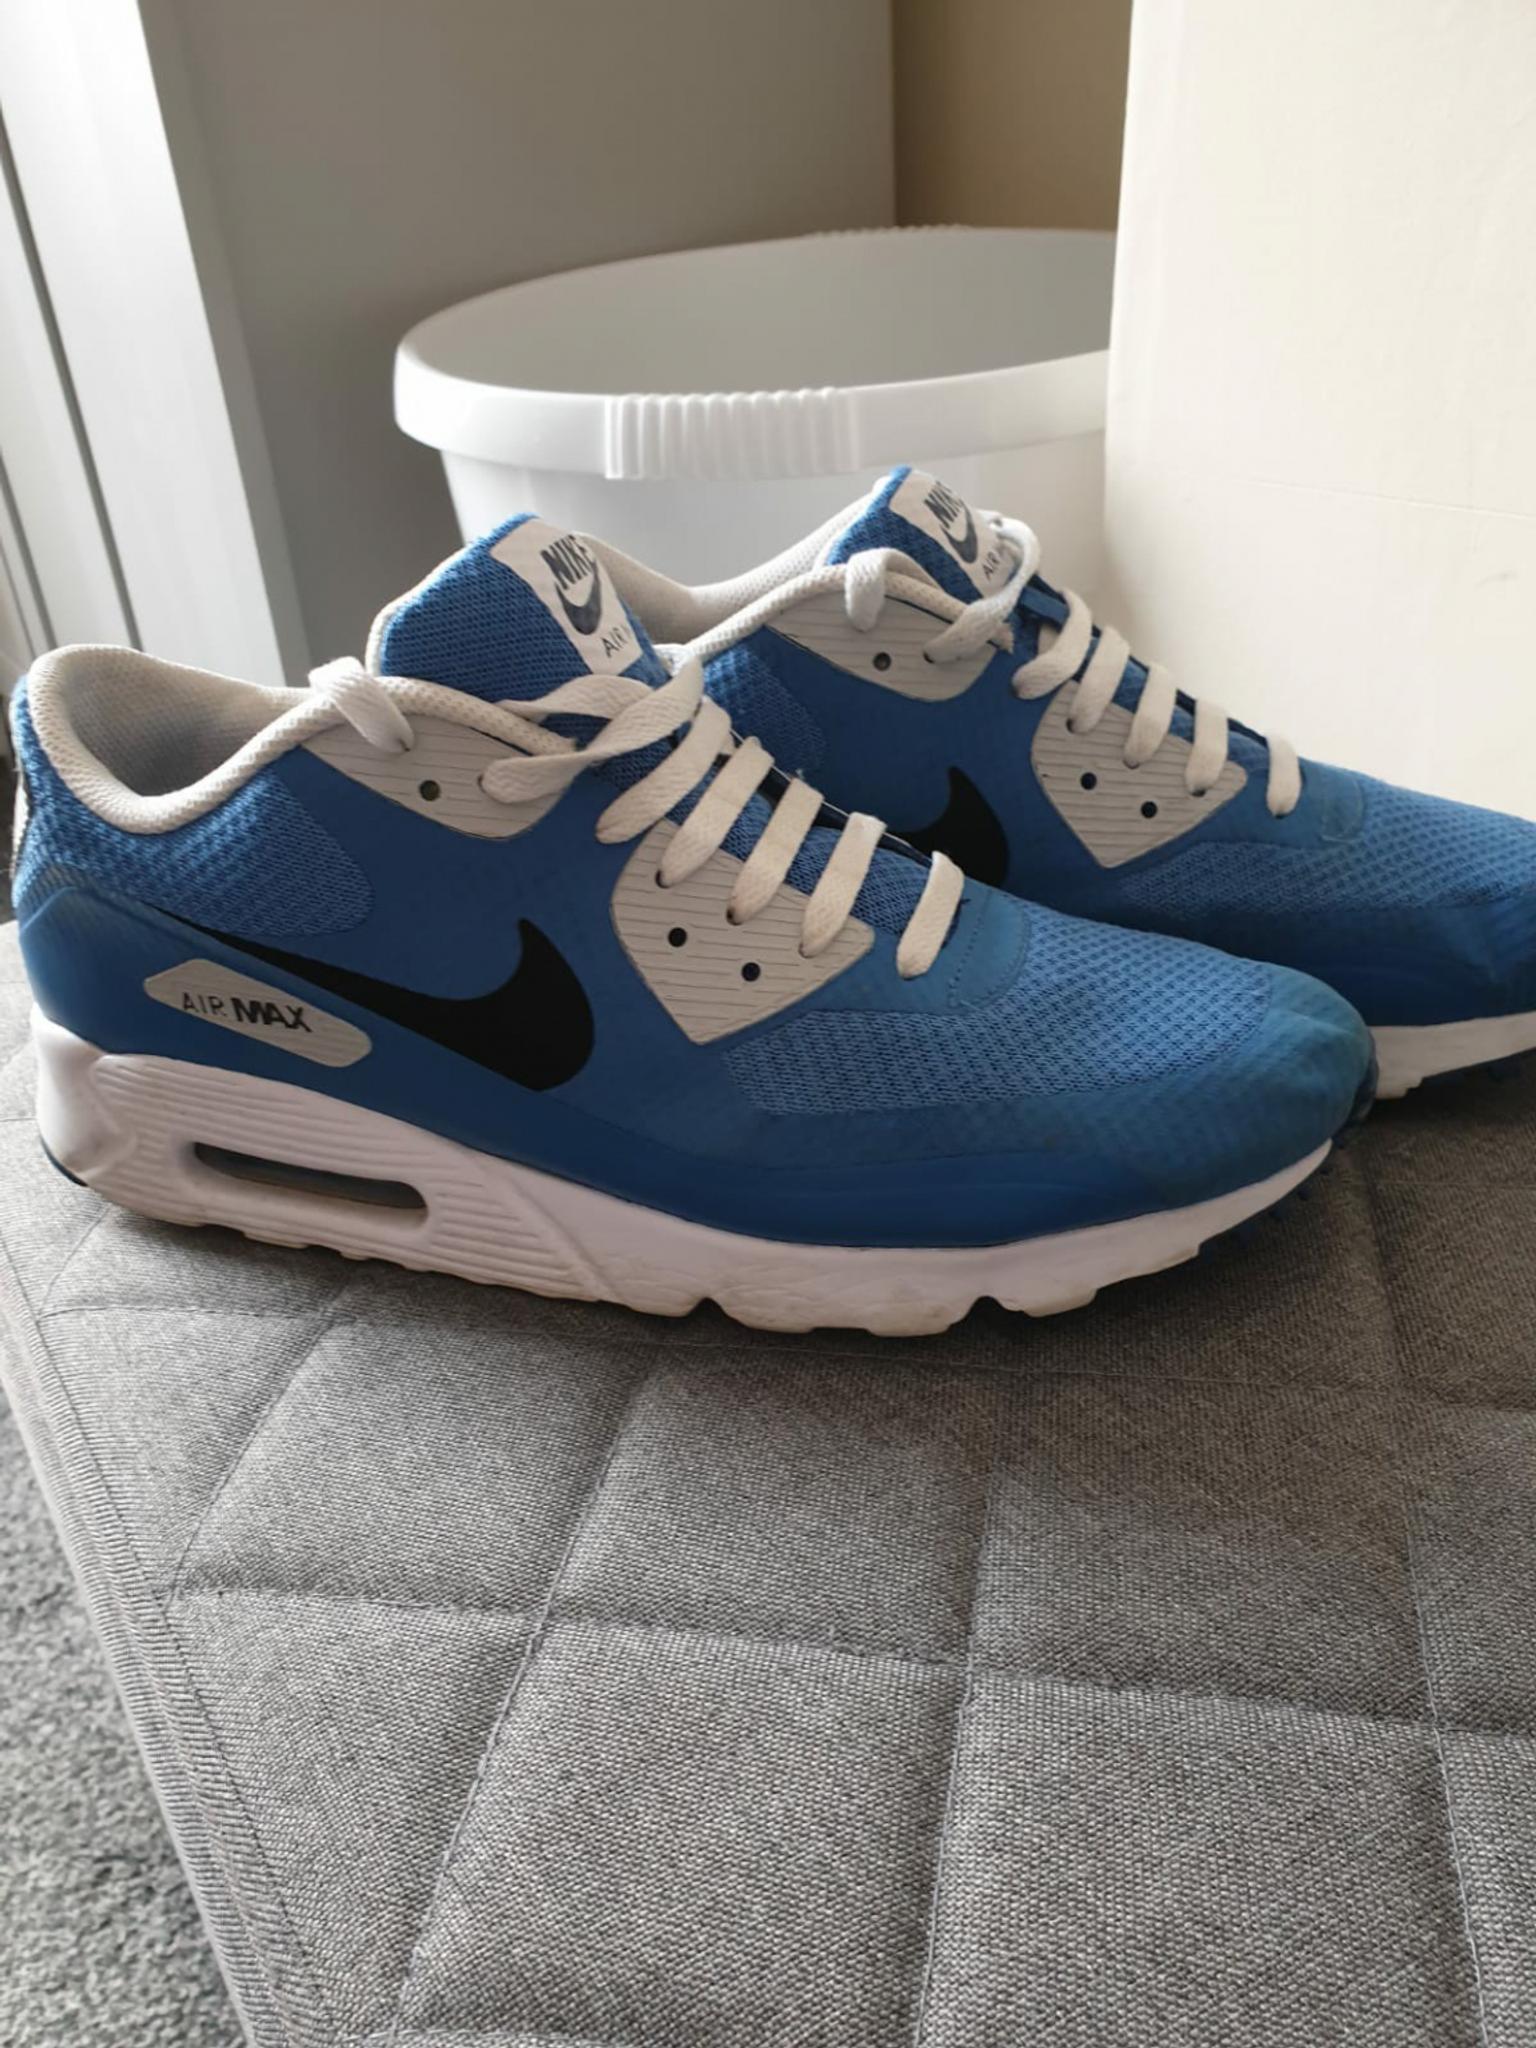 nike air max trainers size 5